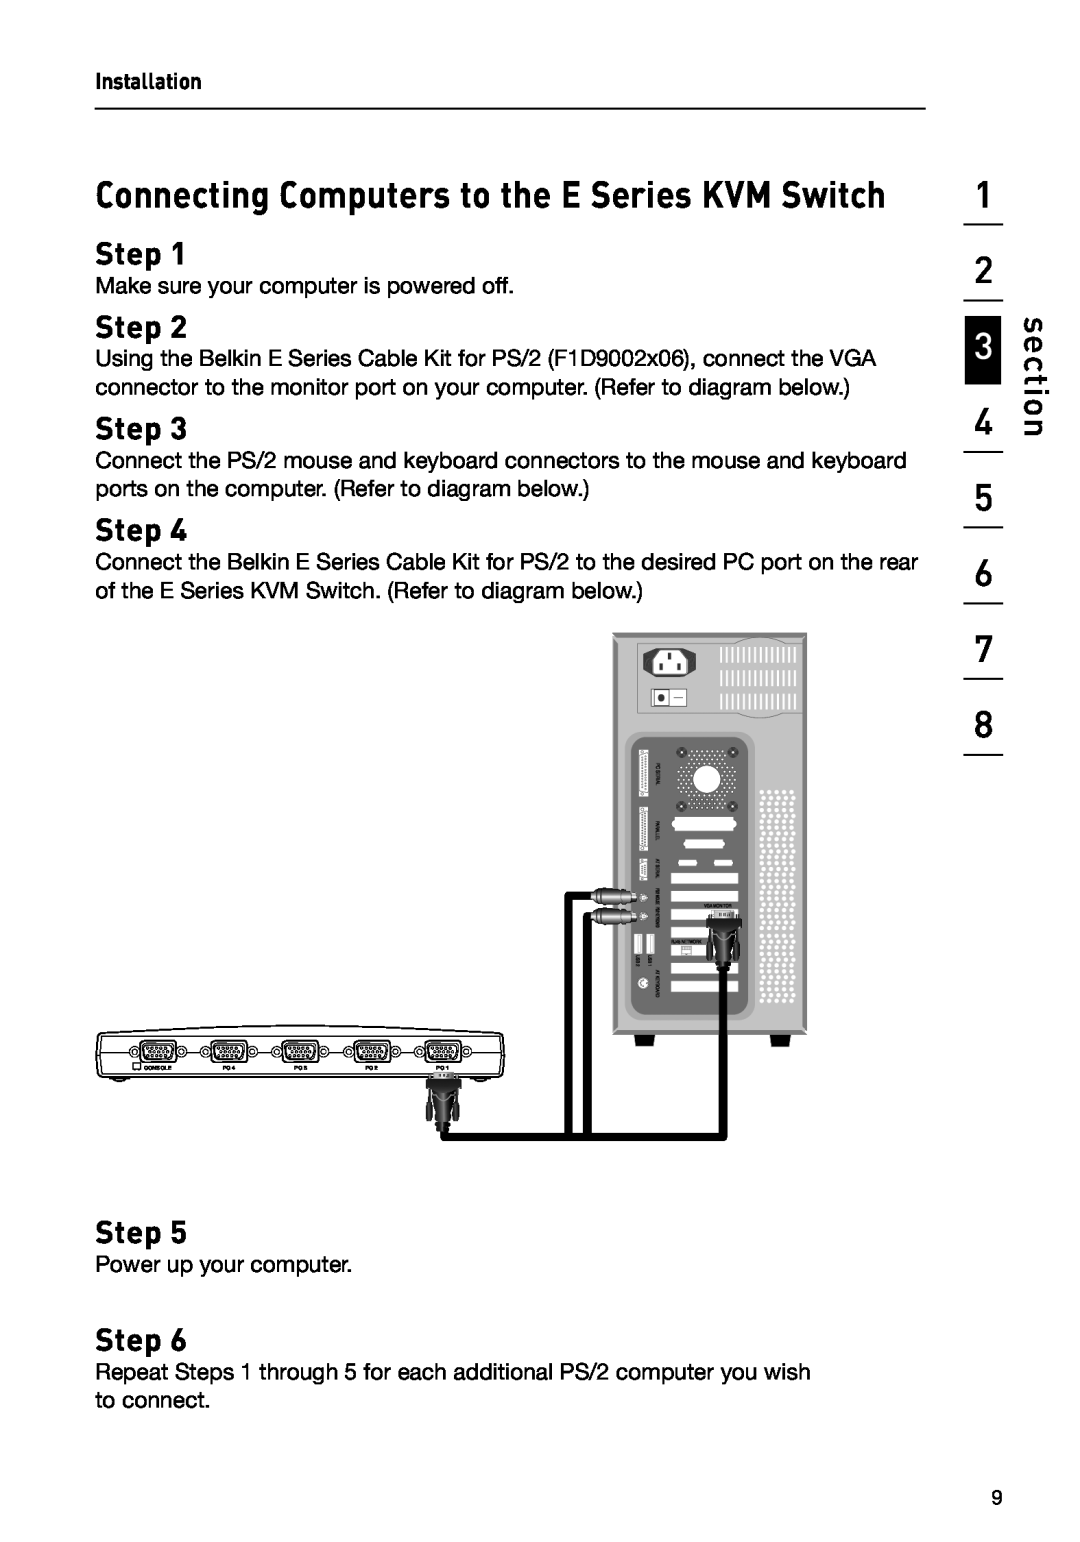 Belkin F1DB102P2 user manual Connecting Computers to the E Series KVM Switch, section, Step 